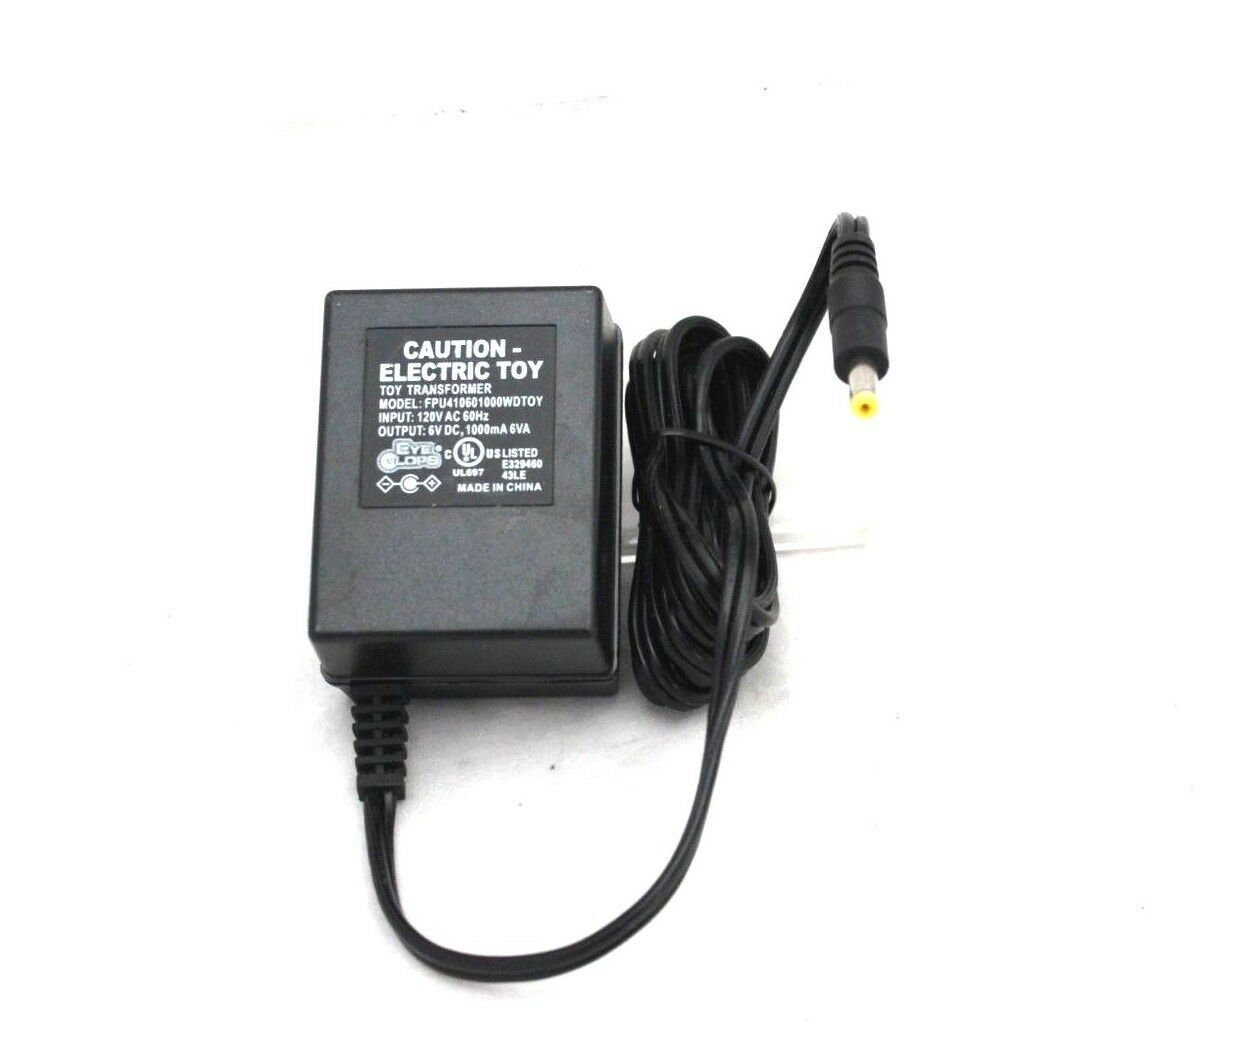 ELECTRIC TOY Transformer Adapter Charger FPU414060100WDTOY 6VDC 100mA 6VA MPN: Does Not Apply Non-Domestic Product: N